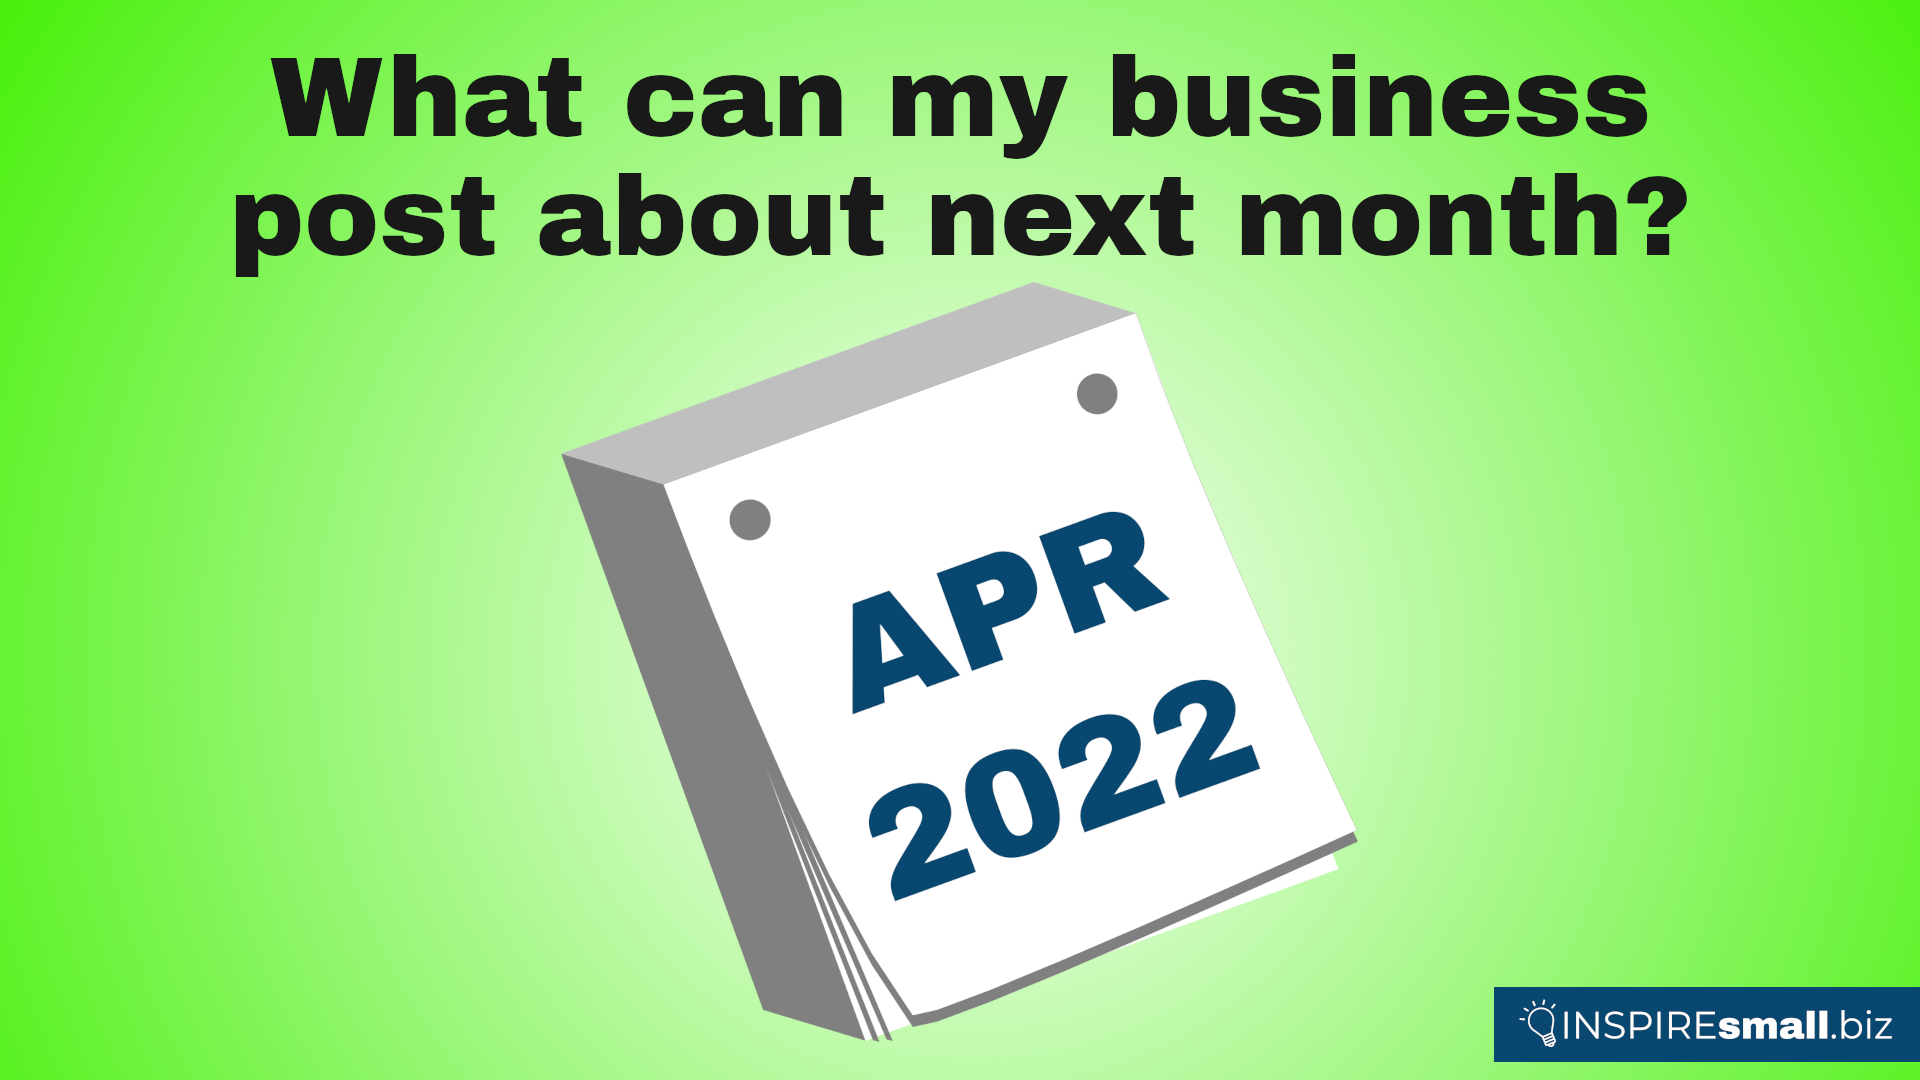 What can my business post about next month? April 2022. Blog from INSPIREsmall.biz